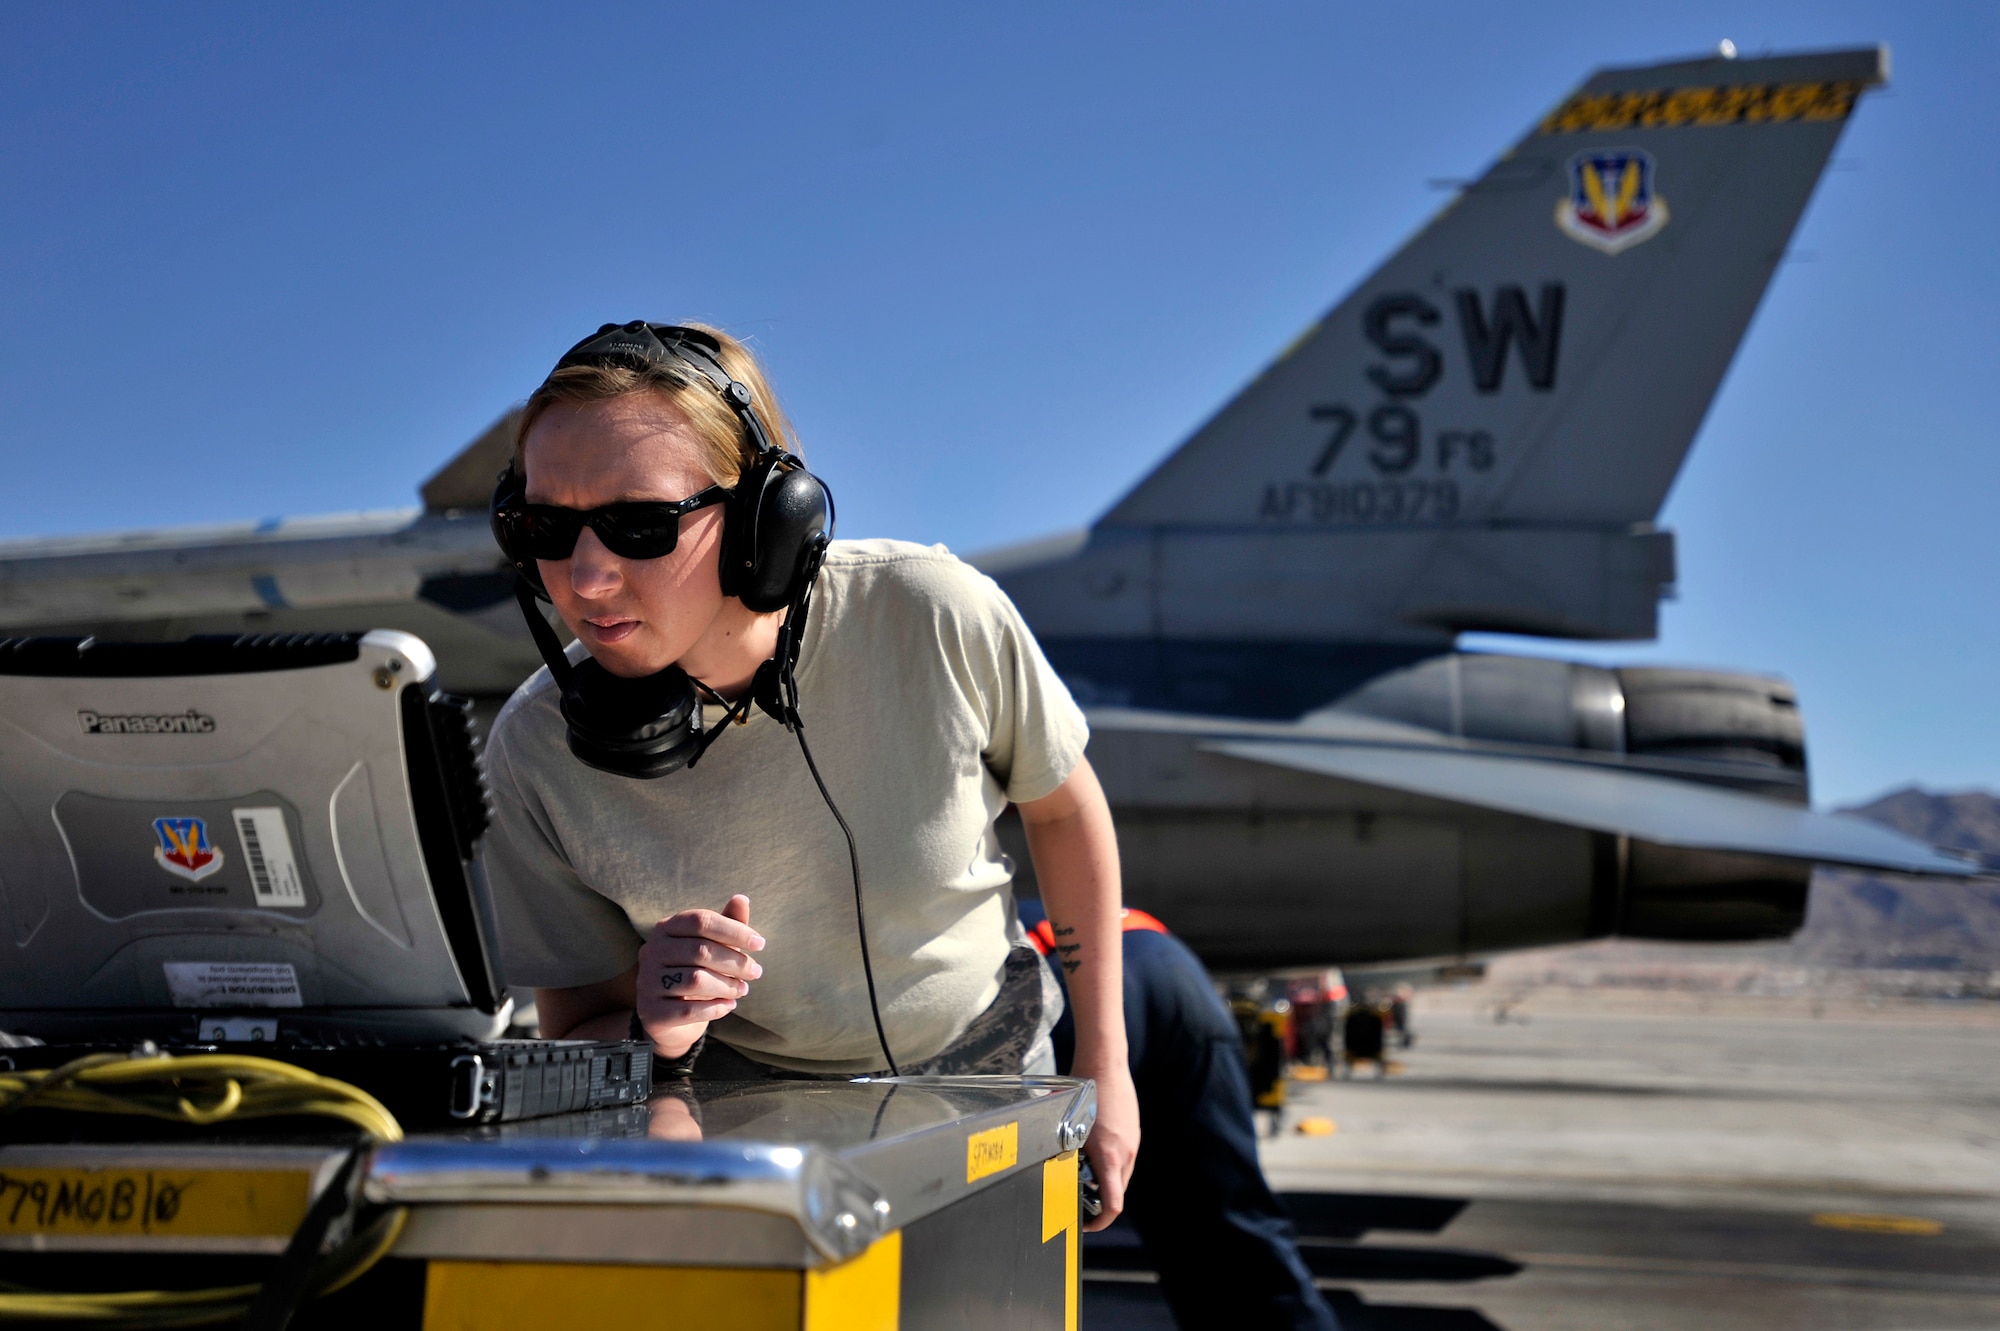 U.S. Air Force Staff Sgt. Elizabeth Tyburski, 20th Communications Squadron client service technician, looks at flight aircraft data on a tough book prior to launching a 79th Fighter Squadron ‘Tigers’ F-16 Fighting Falcon during Red Flag 13-3, March 12, 2013, Nellis Air Force Base, Nev. Tyburski received the rare opportunity to launch an F-16 and experienced what it’s like to be a crew chief. (U.S. Air Force photo by Staff Sgt. Kenny Holston/Released)